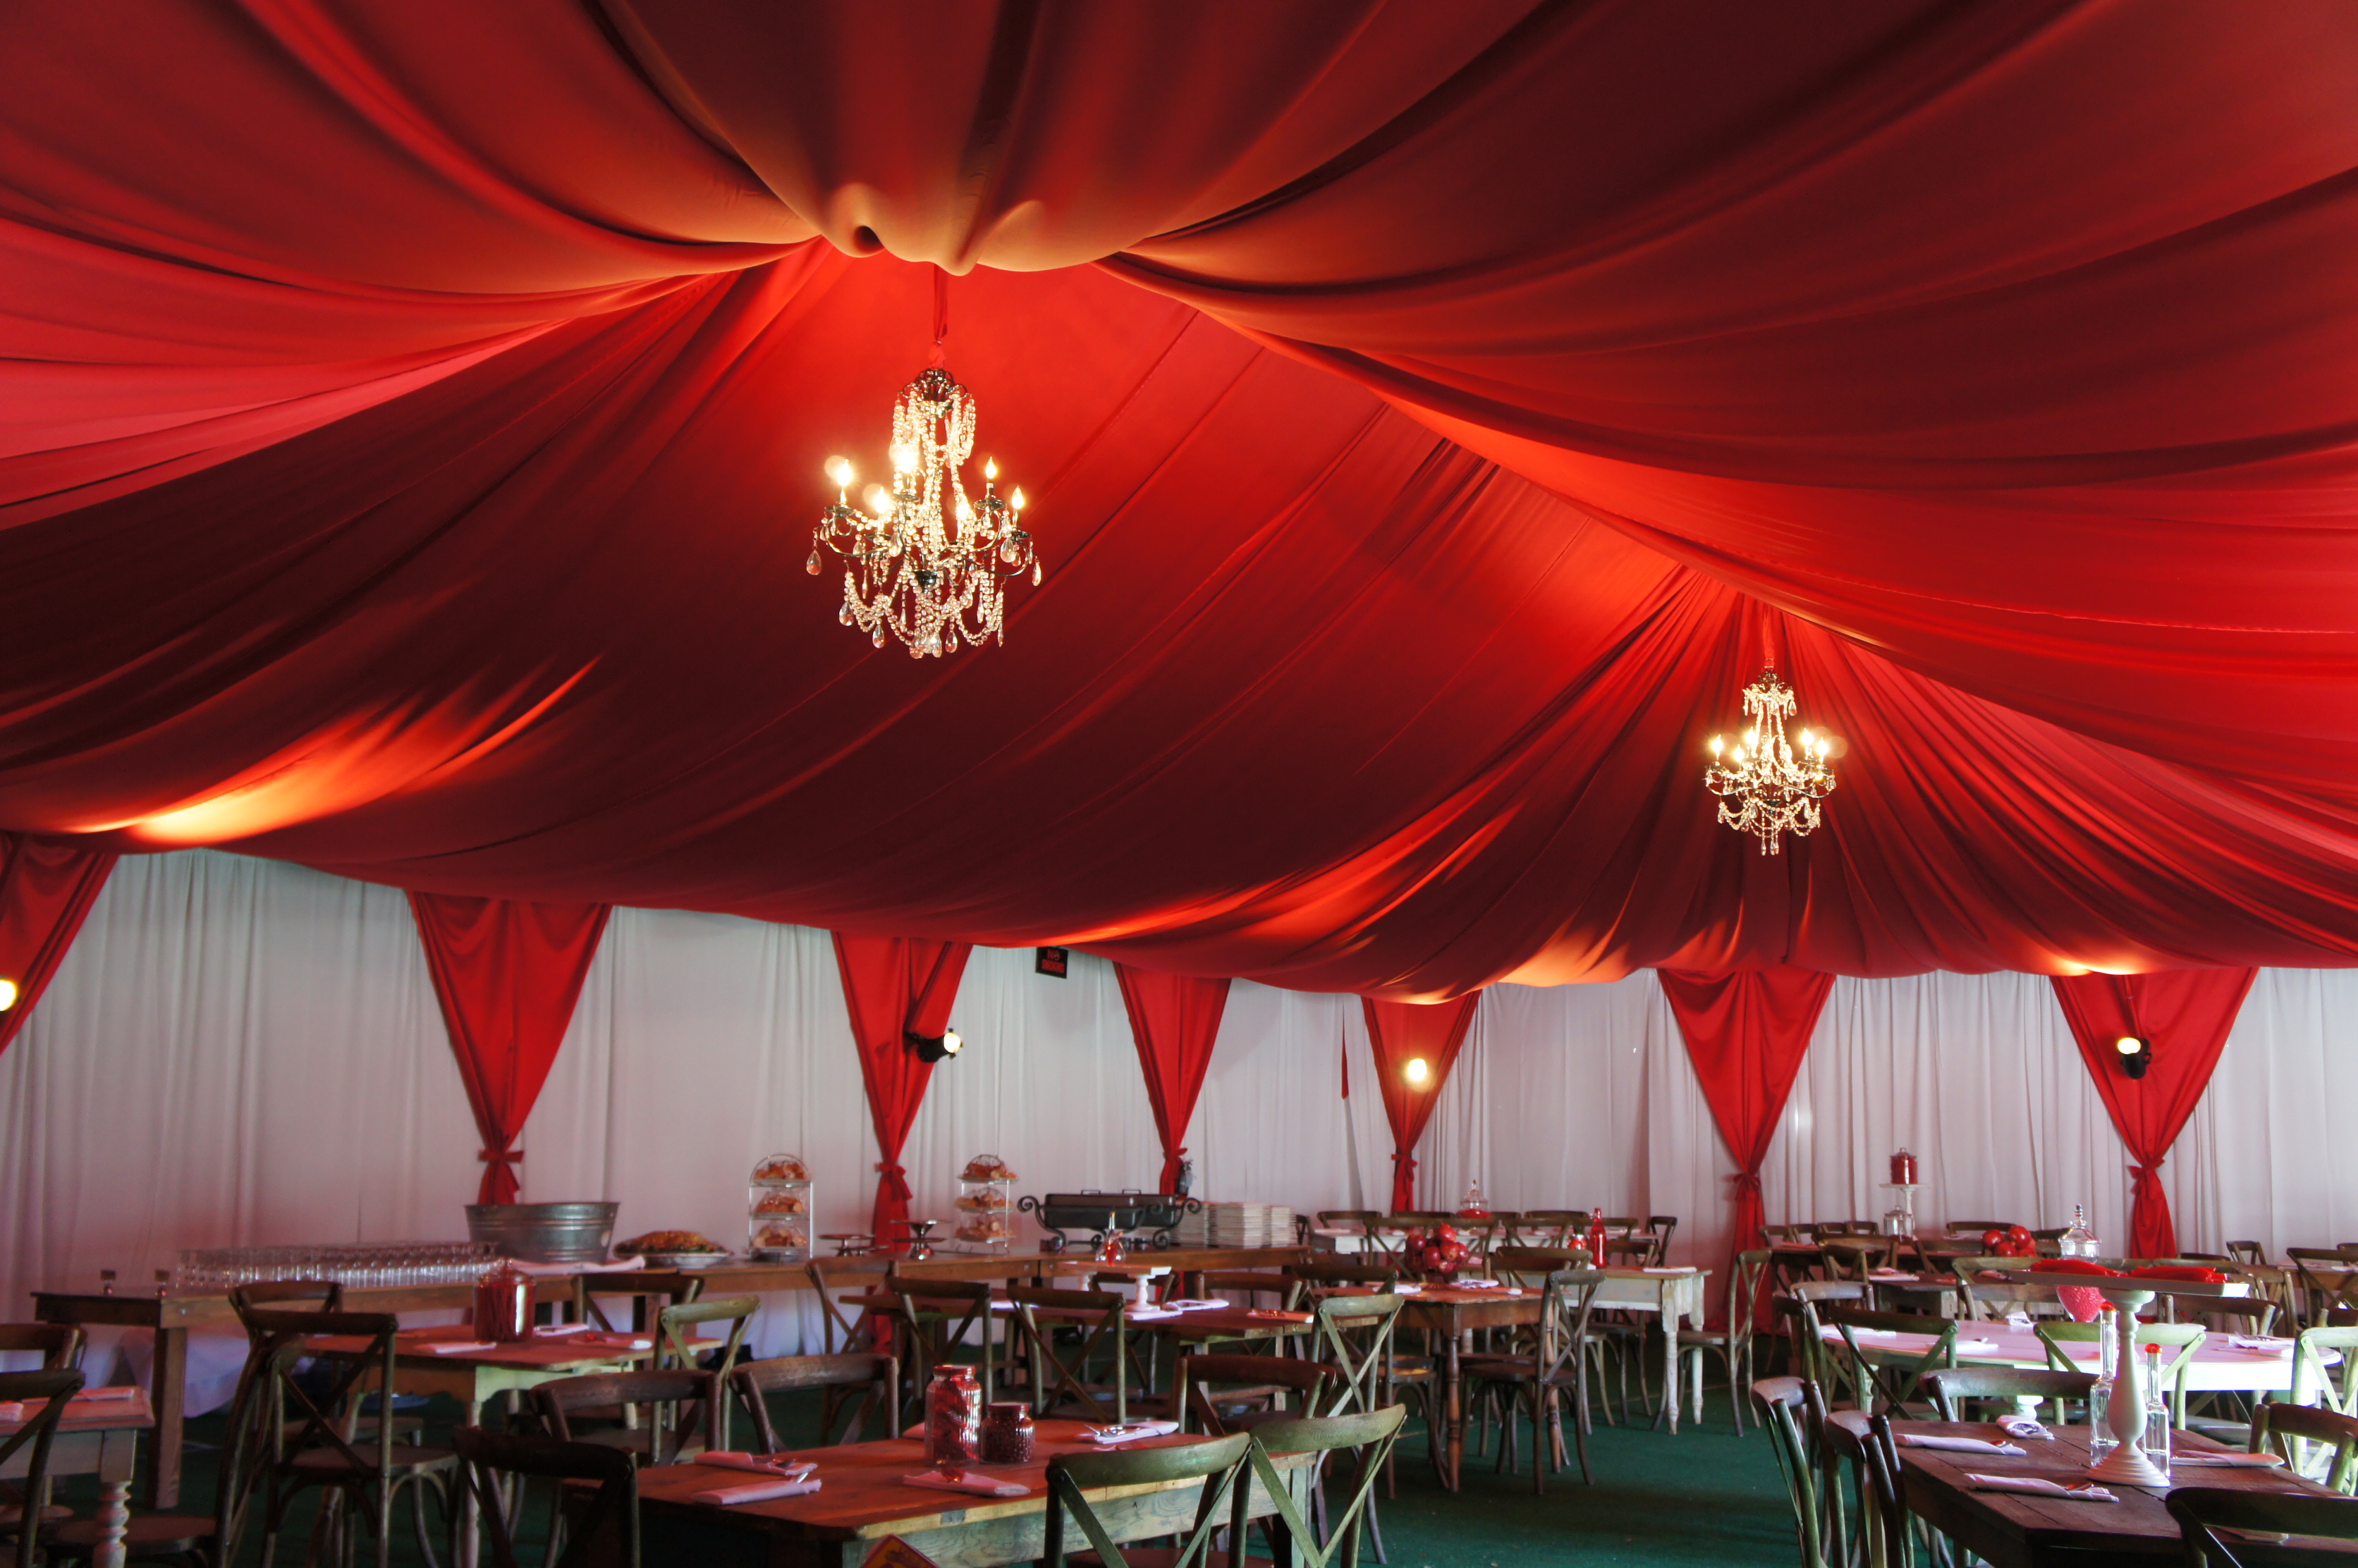 Scarlet Draped Tent with Chandeliers